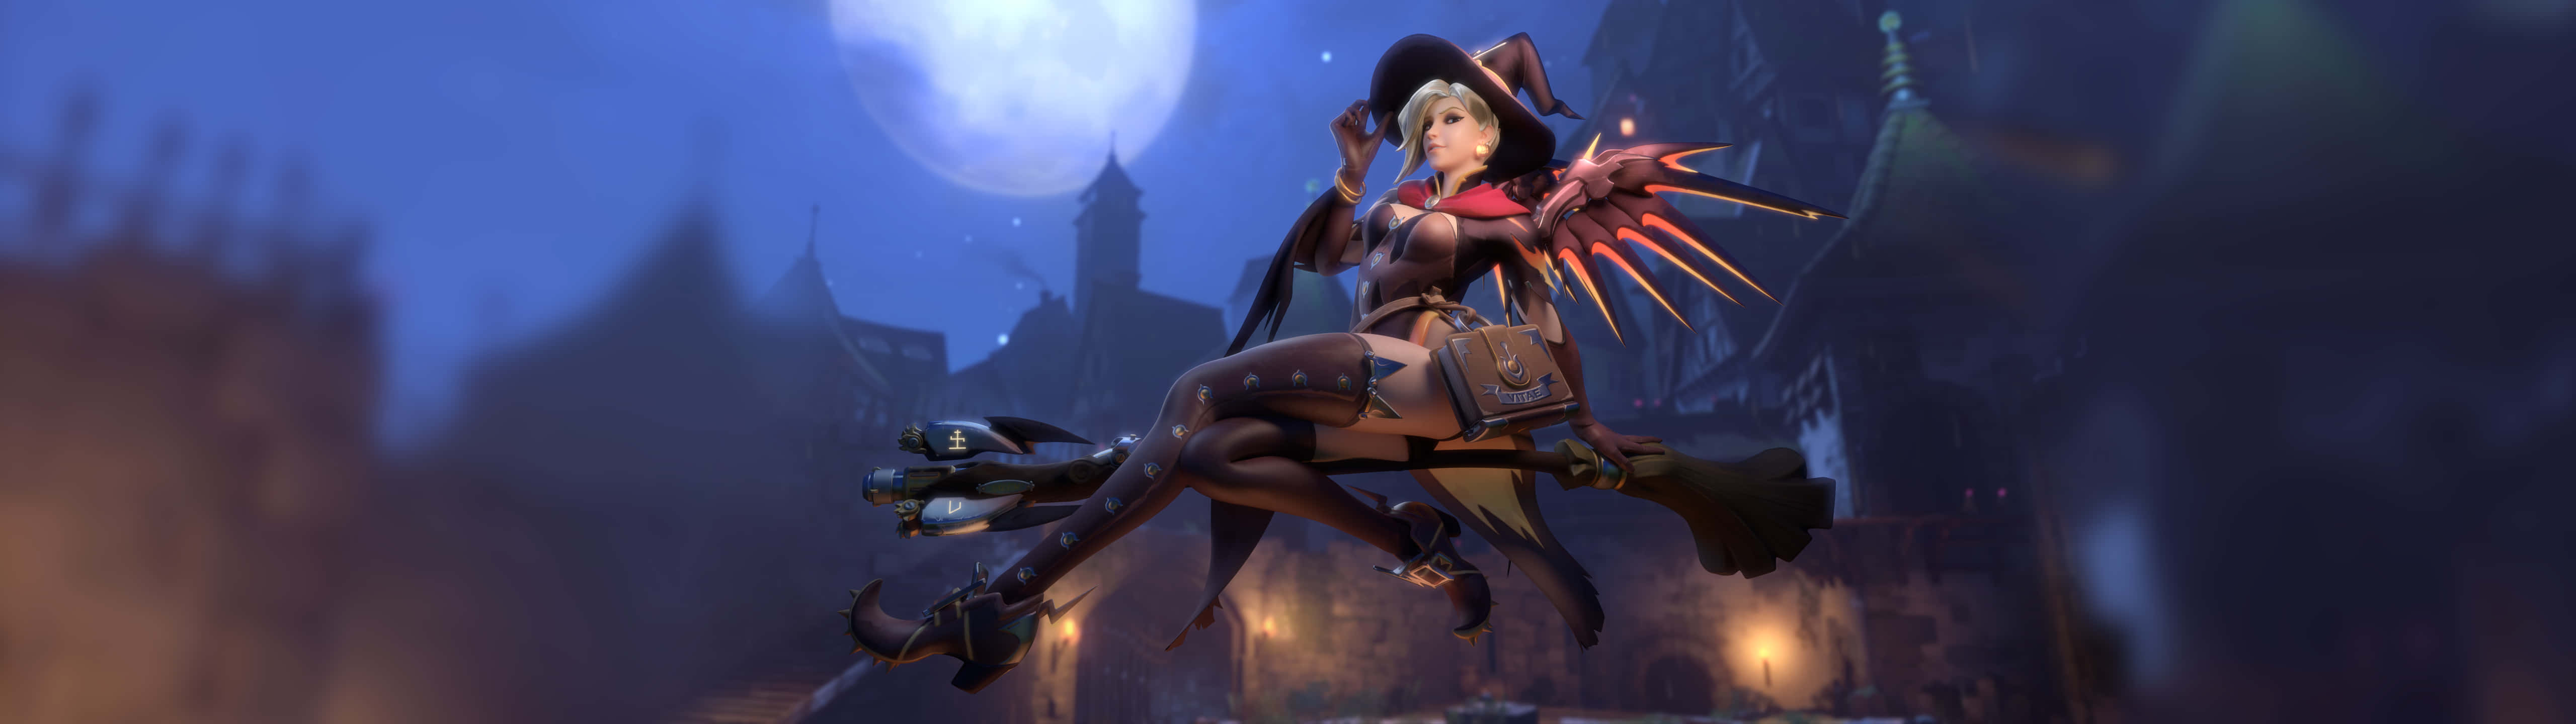 Witch Mercy is a new Halloween skin for Overwatch. - 5120x1440